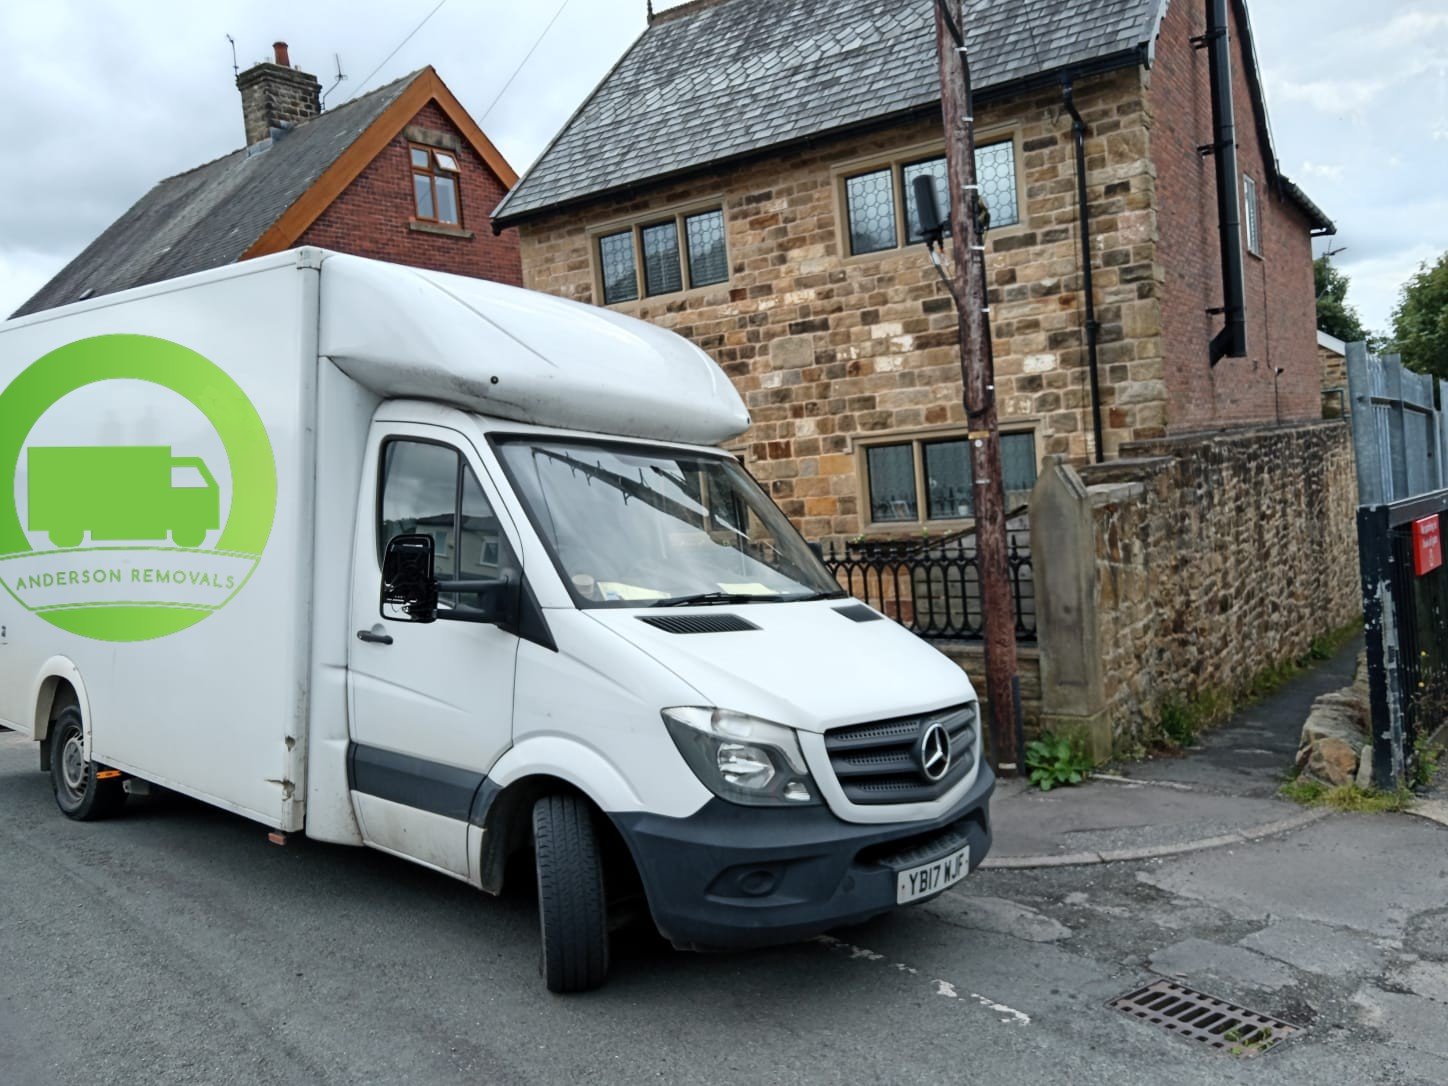 Andersons Removals Company